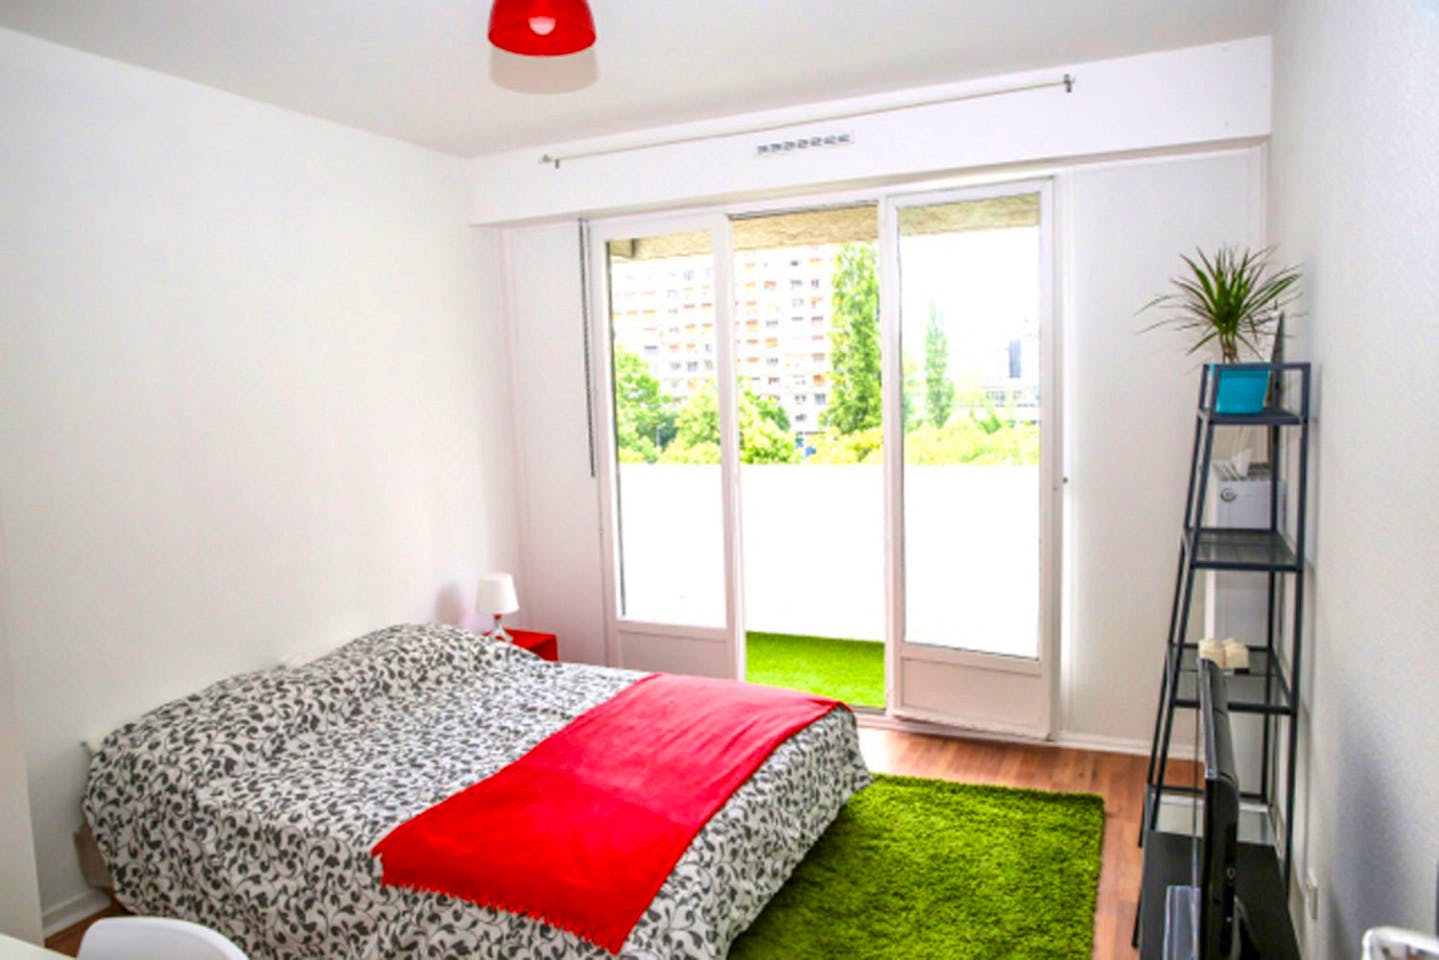 Large apartment ideally located in the student district of Strasbourg